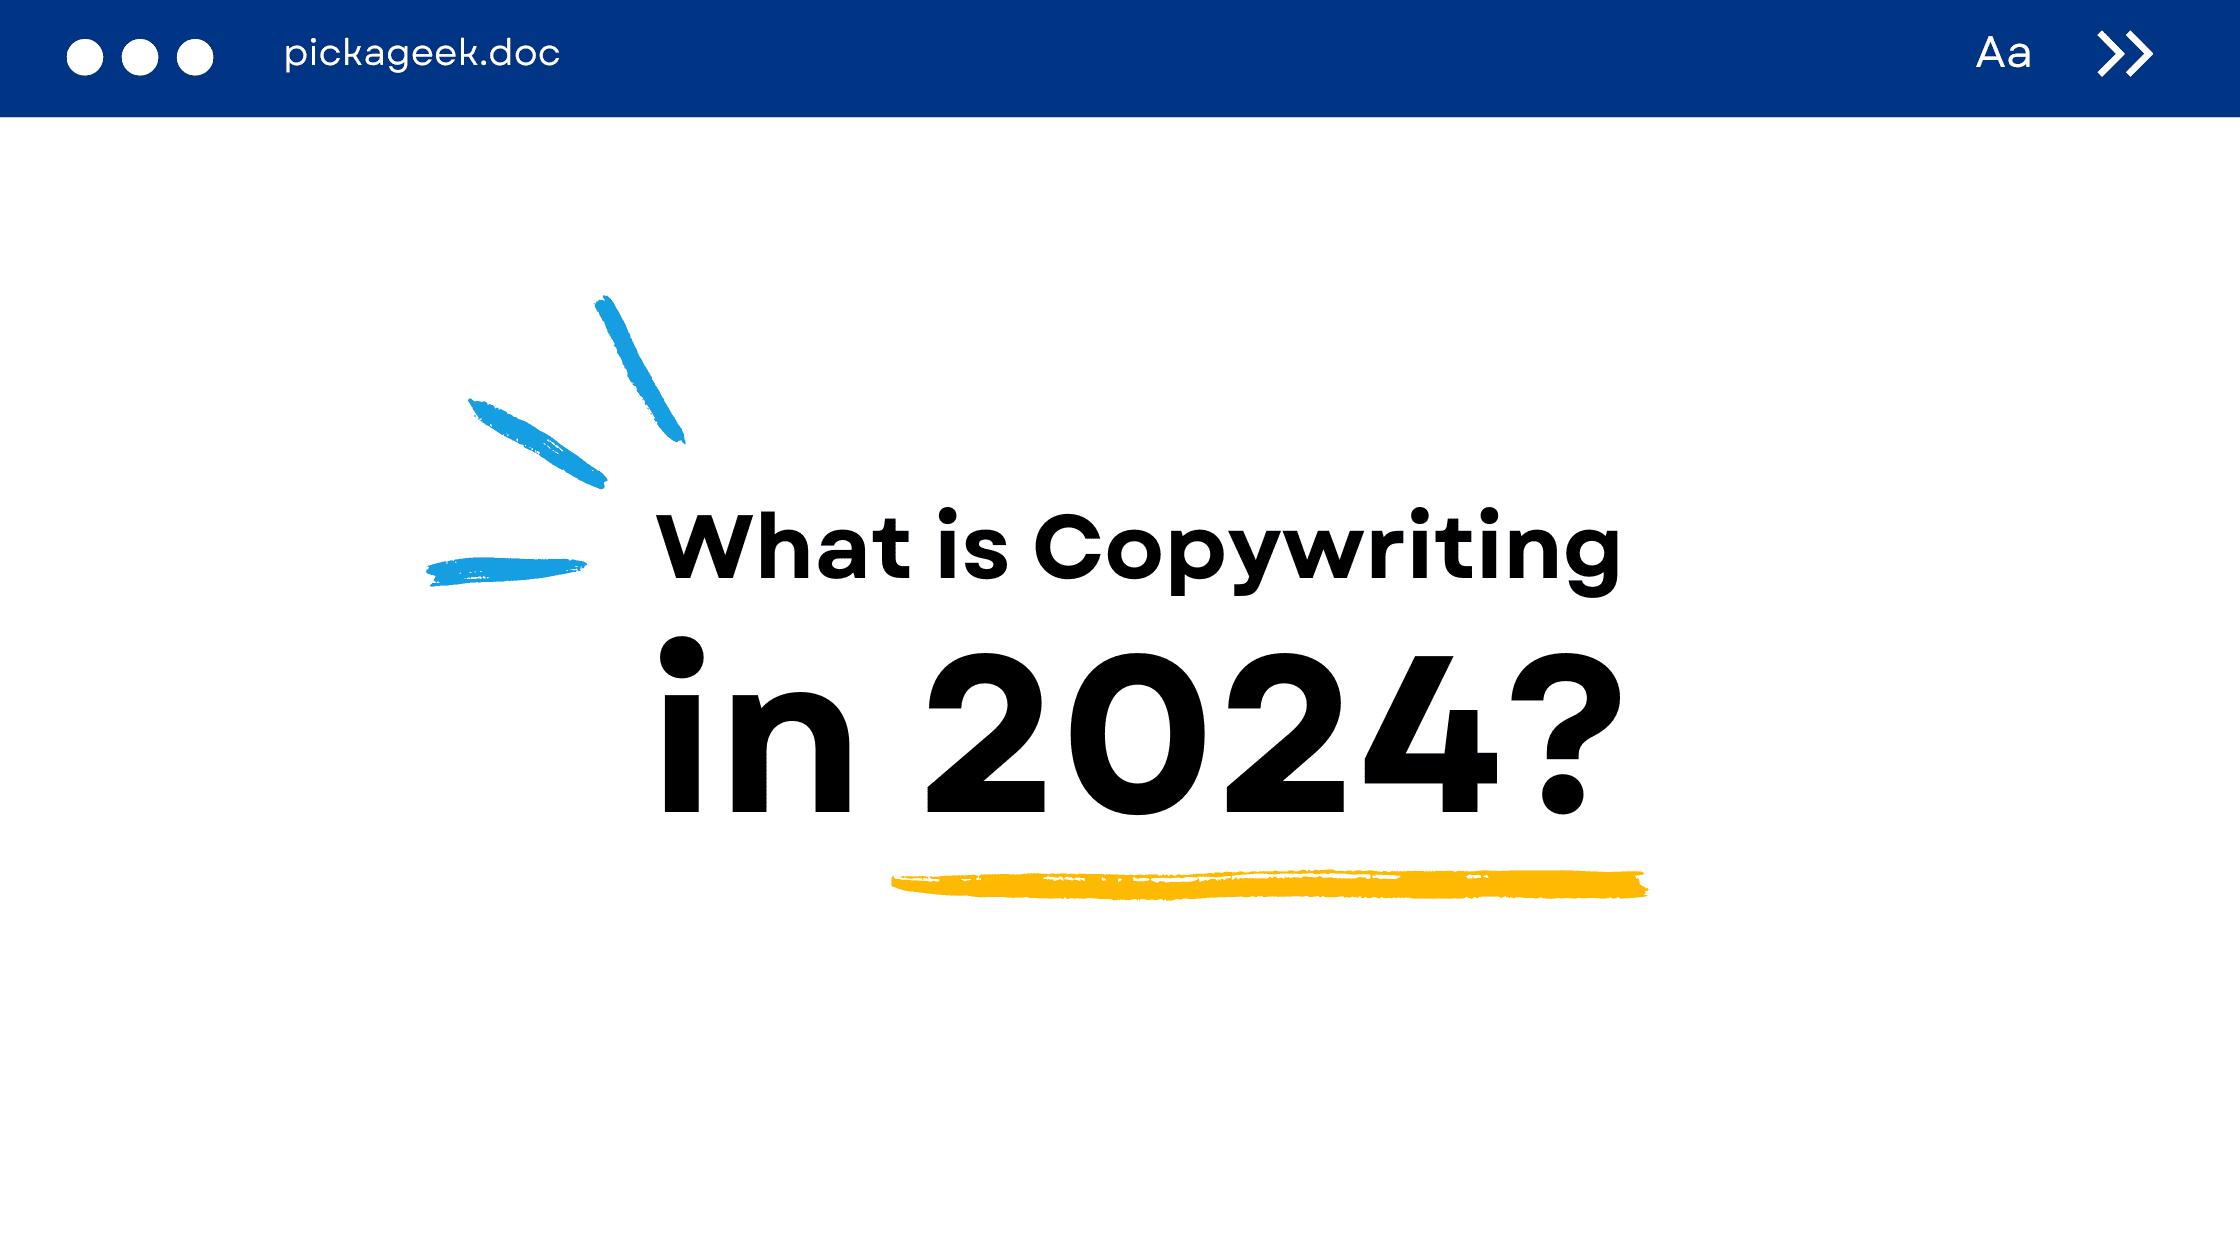 What is Copywriting in 2024?